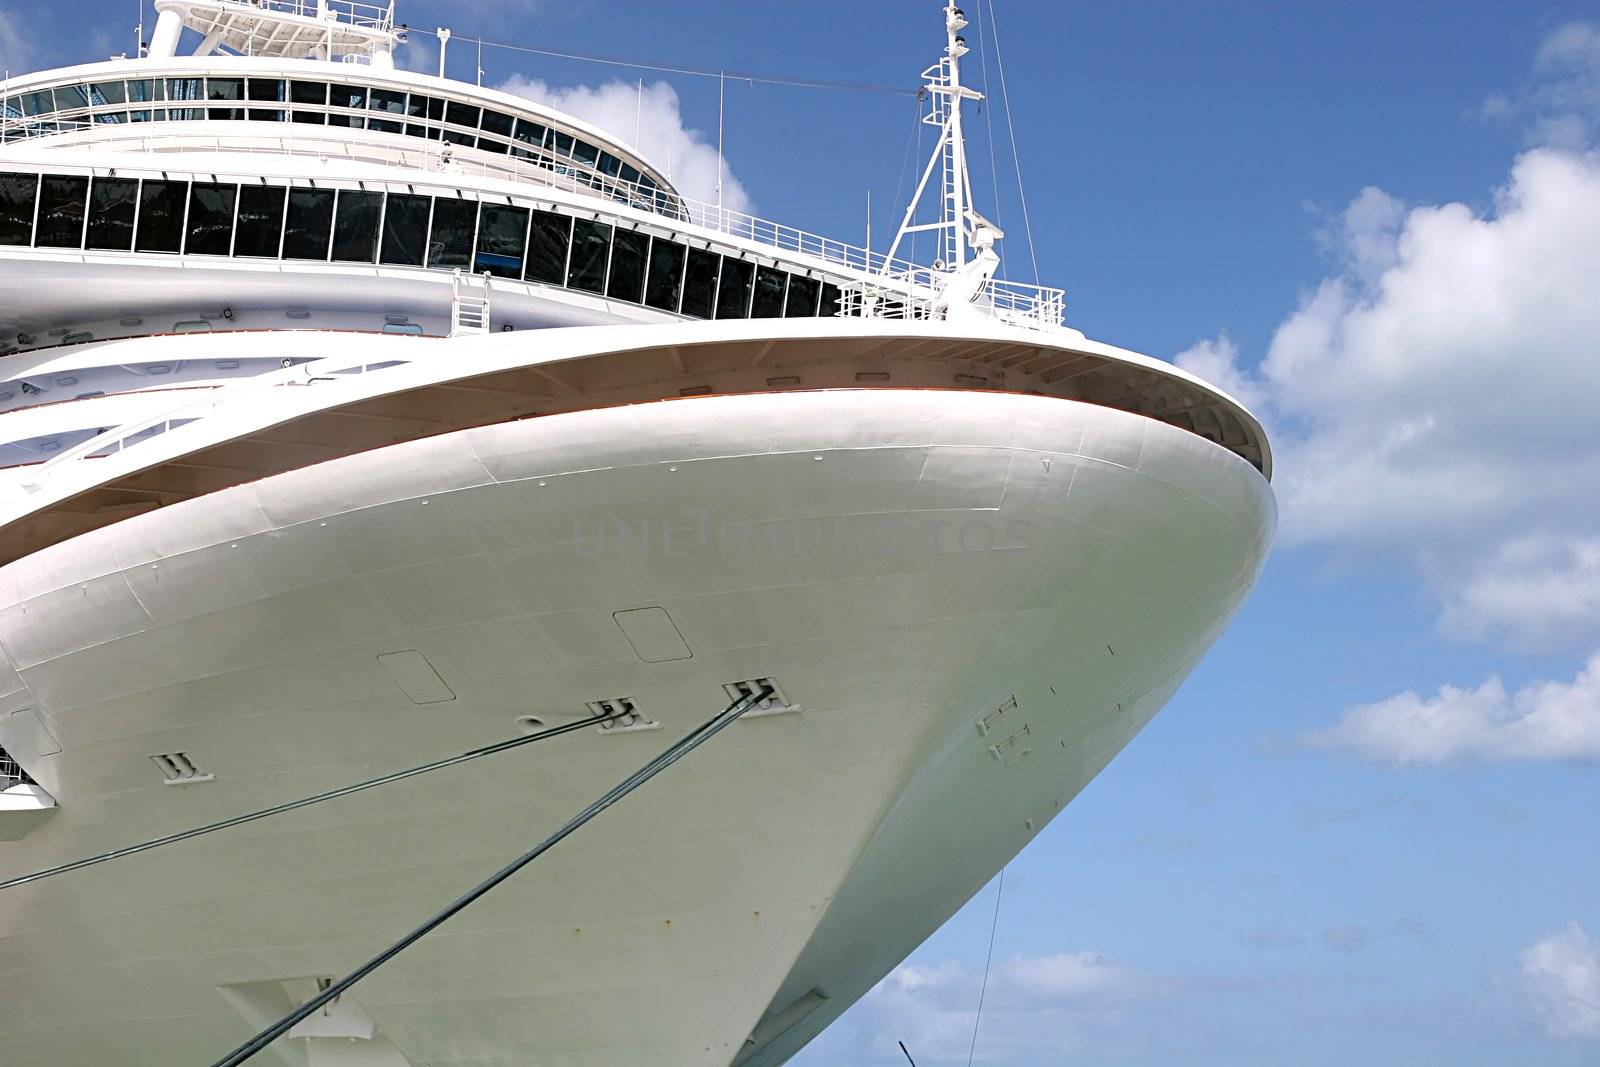 The bow of a cruise ship against the sky